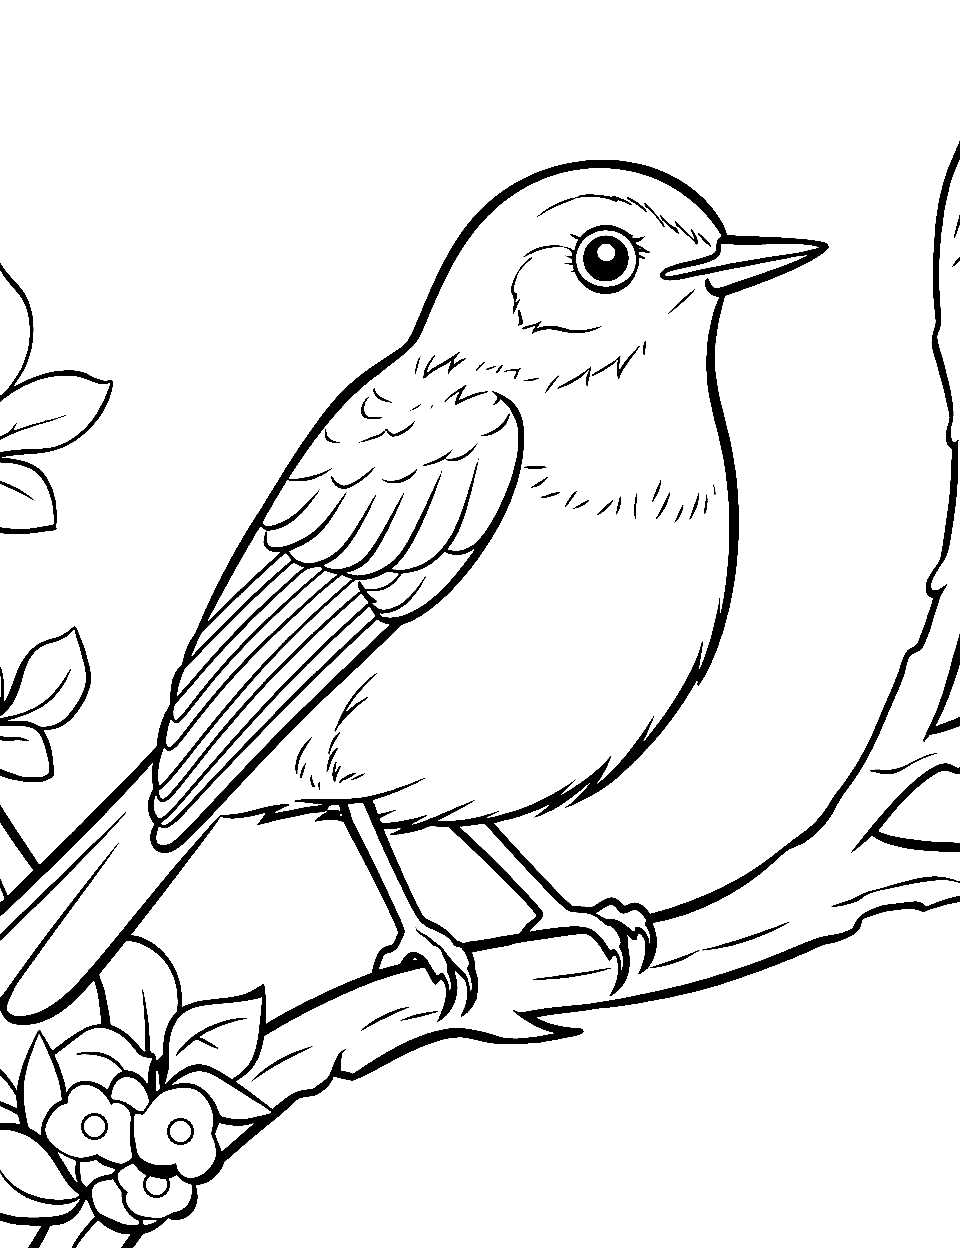 Robin in Spring Coloring Page - A cheerful robin sitting on a branch during springtime.